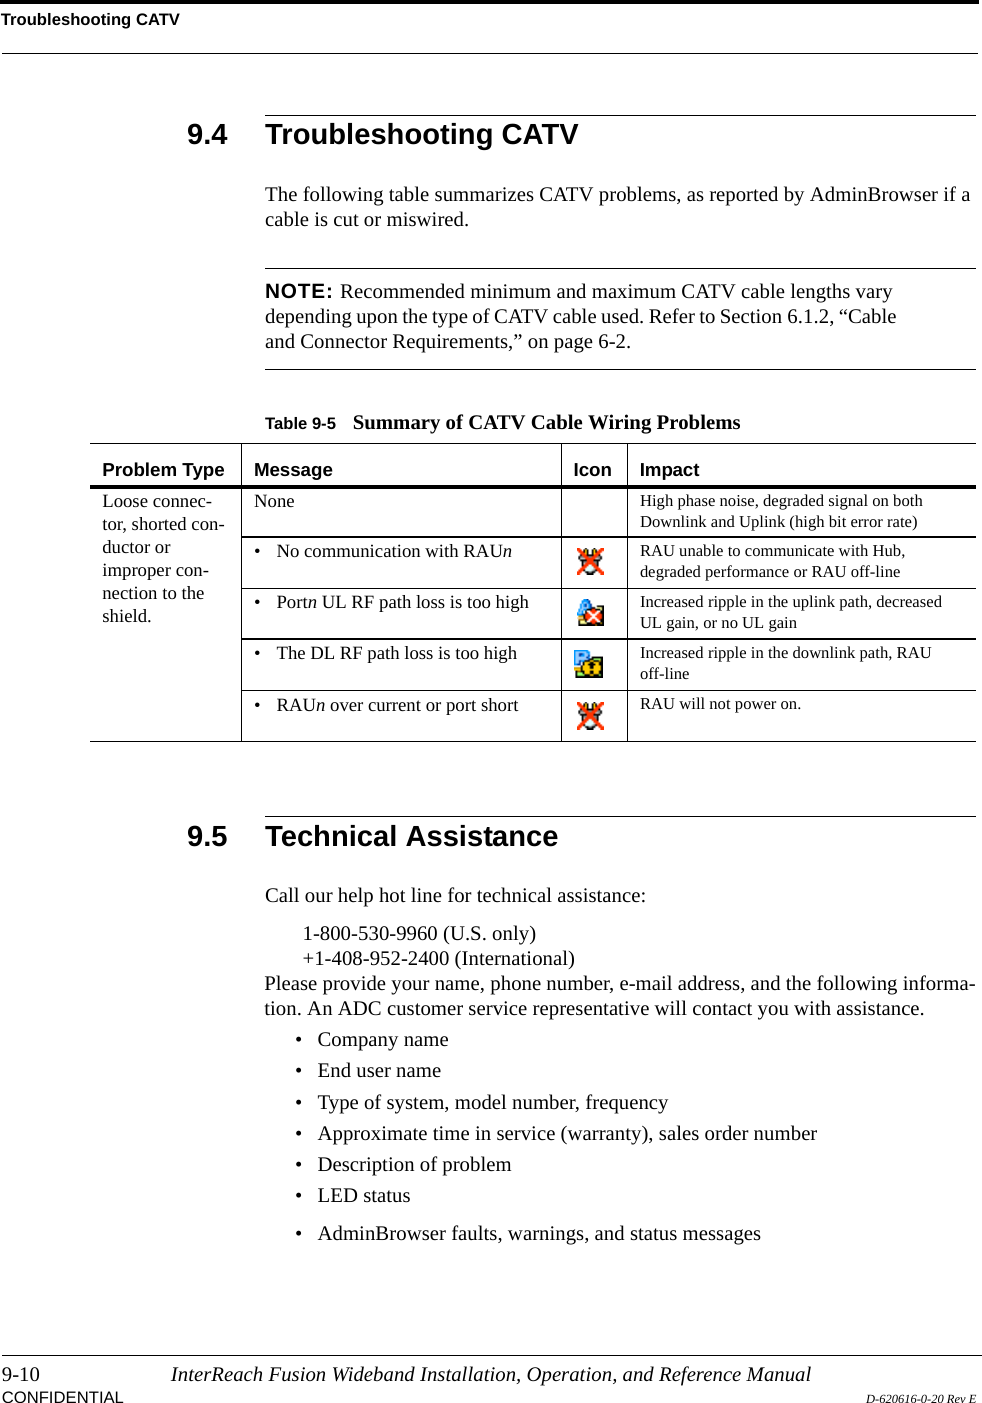 Troubleshooting CATV9-10 InterReach Fusion Wideband Installation, Operation, and Reference ManualCONFIDENTIAL D-620616-0-20 Rev E9.4 Troubleshooting CATVThe following table summarizes CATV problems, as reported by AdminBrowser if a cable is cut or miswired.NOTE: Recommended minimum and maximum CATV cable lengths vary depending upon the type of CATV cable used. Refer to Section 6.1.2, “Cable and Connector Requirements,” on page 6-2.9.5 Technical AssistanceCall our help hot line for technical assistance:1-800-530-9960 (U.S. only)+1-408-952-2400 (International)Please provide your name, phone number, e-mail address, and the following informa-tion. An ADC customer service representative will contact you with assistance.• Company name• End user name• Type of system, model number, frequency• Approximate time in service (warranty), sales order number• Description of problem• LED status• AdminBrowser faults, warnings, and status messagesTable 9-5 Summary of CATV Cable Wiring ProblemsProblem Type Message Icon ImpactLoose connec-tor, shorted con-ductor or improper con-nection to the shield.None High phase noise, degraded signal on both Downlink and Uplink (high bit error rate)• No communication with RAUn  RAU unable to communicate with Hub, degraded performance or RAU off-line• Portn UL RF path loss is too high Increased ripple in the uplink path, decreased UL gain, or no UL gain• The DL RF path loss is too high Increased ripple in the downlink path, RAU off-line•RAUn over current or port short RAU will not power on.